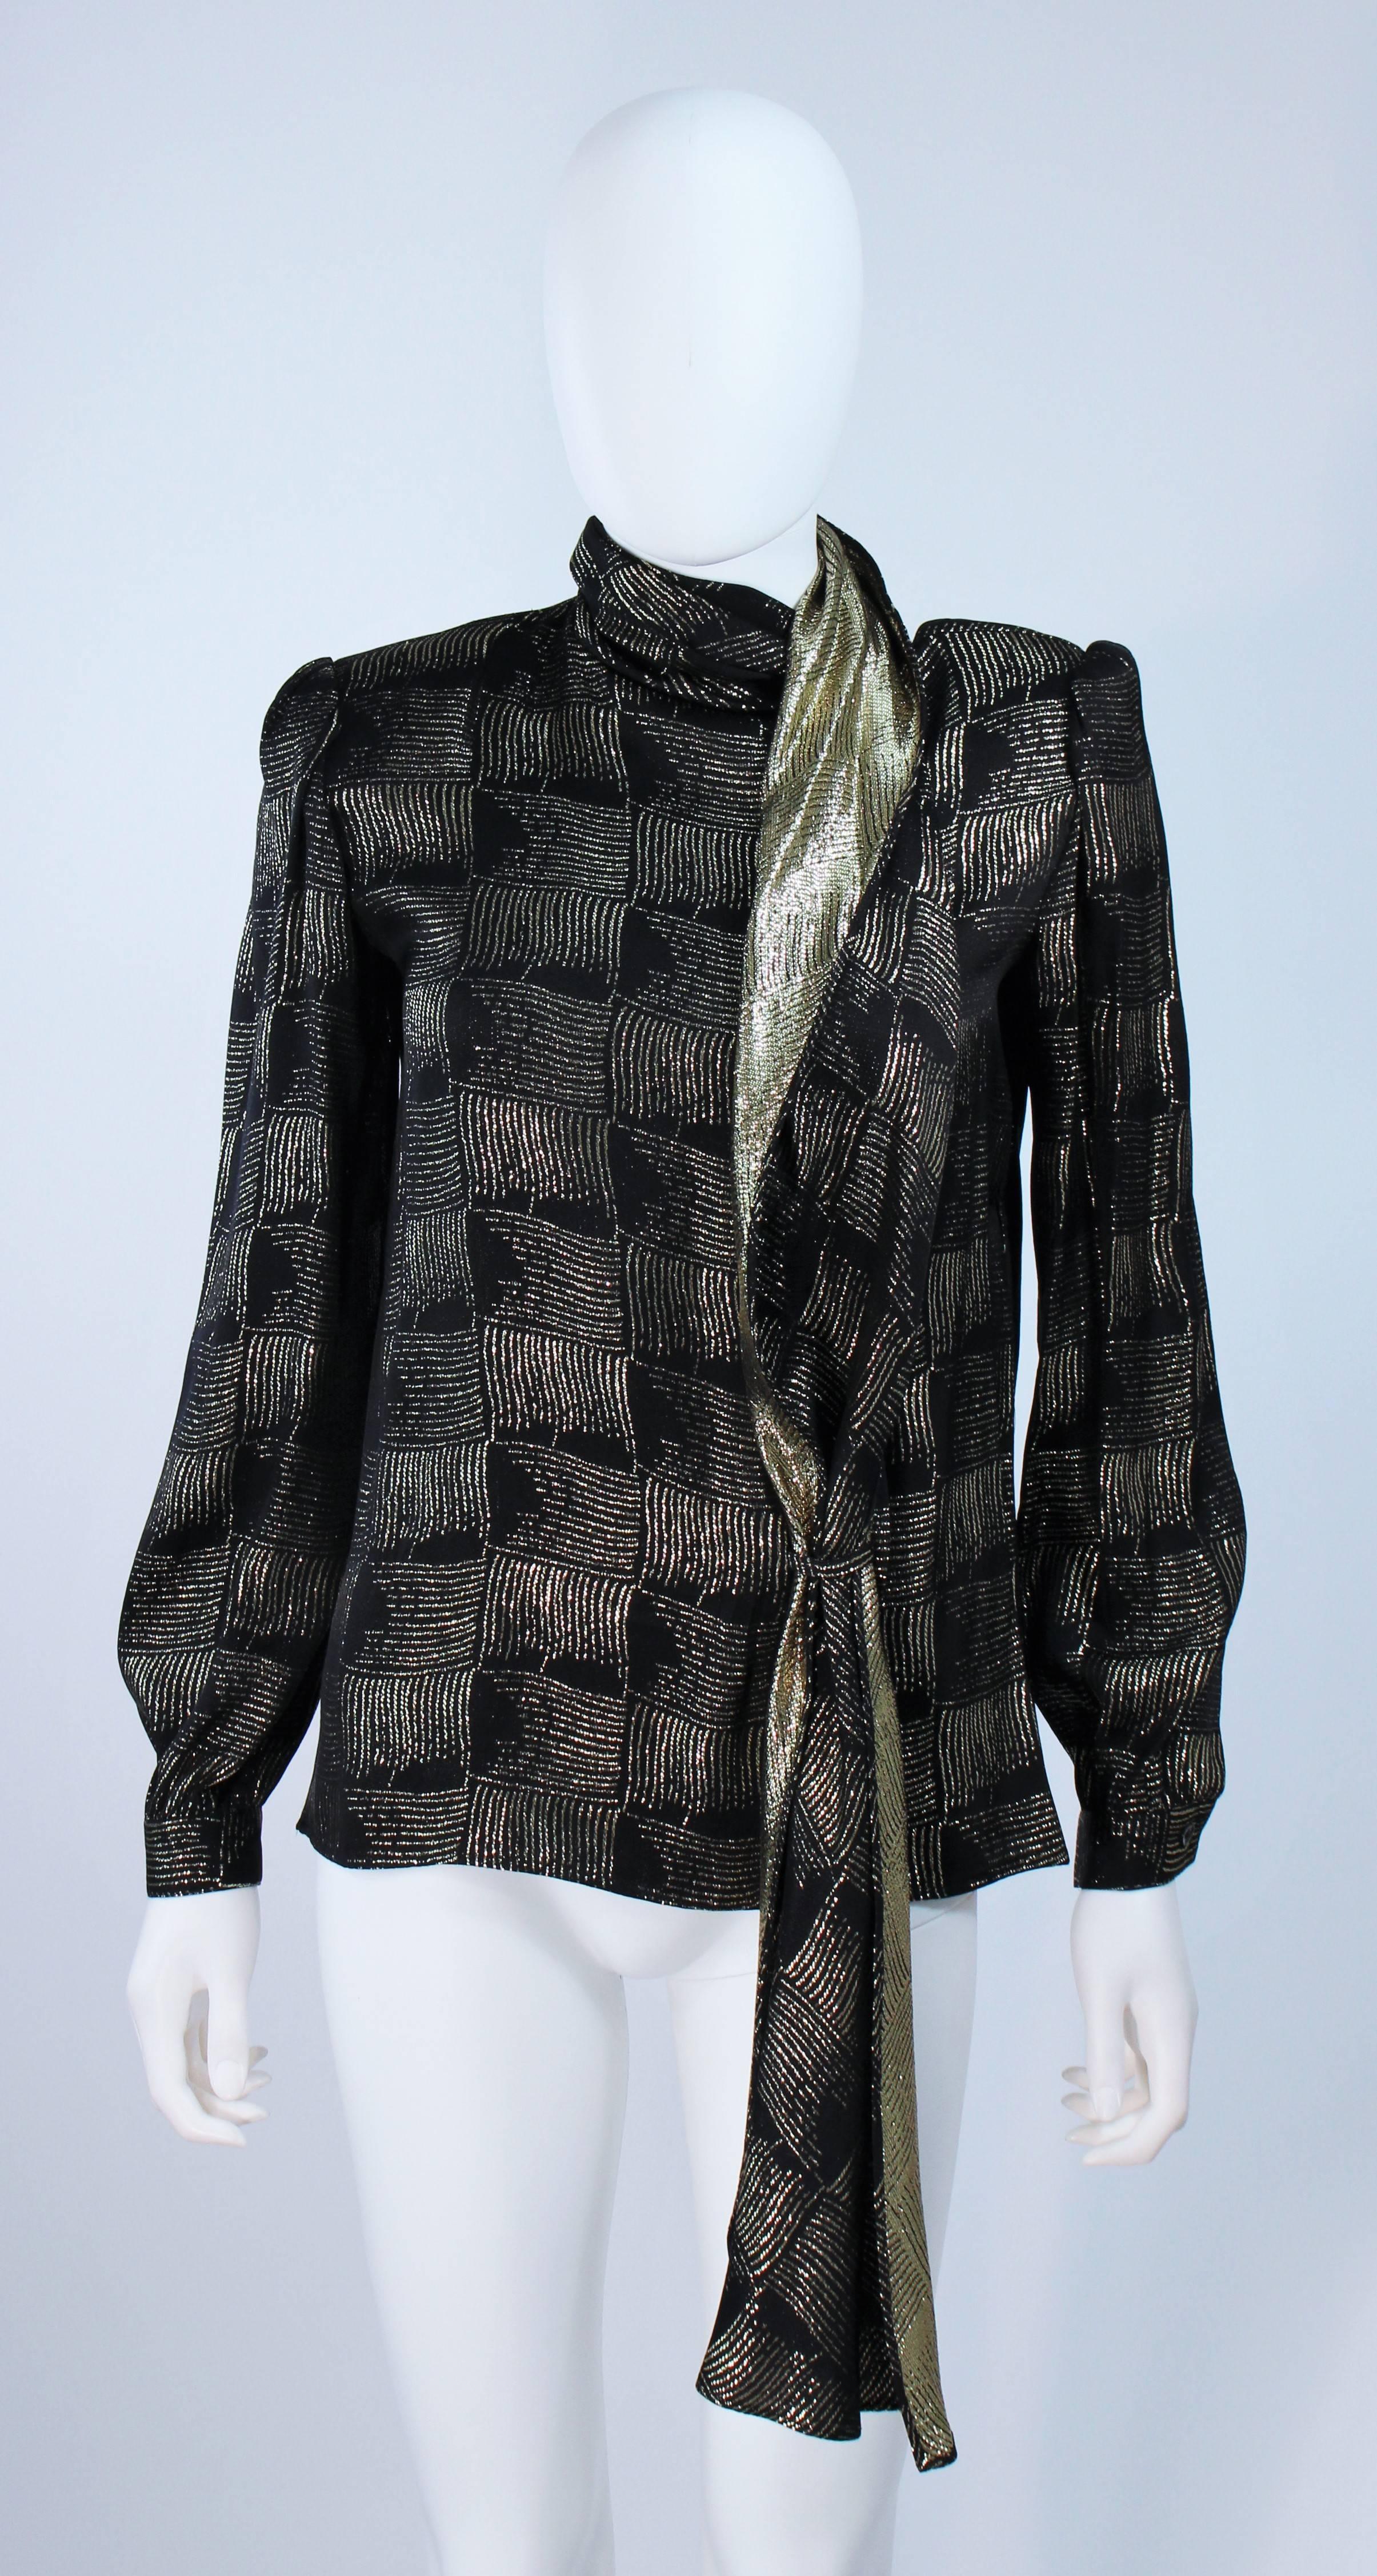  This Valentino blouse is composed of a black and gold silk lame. Features center front buttons and neck sash. In excellent vintage condition. 

**Please cross-reference measurements for personal accuracy. 

Measures (Approximately)
Length: